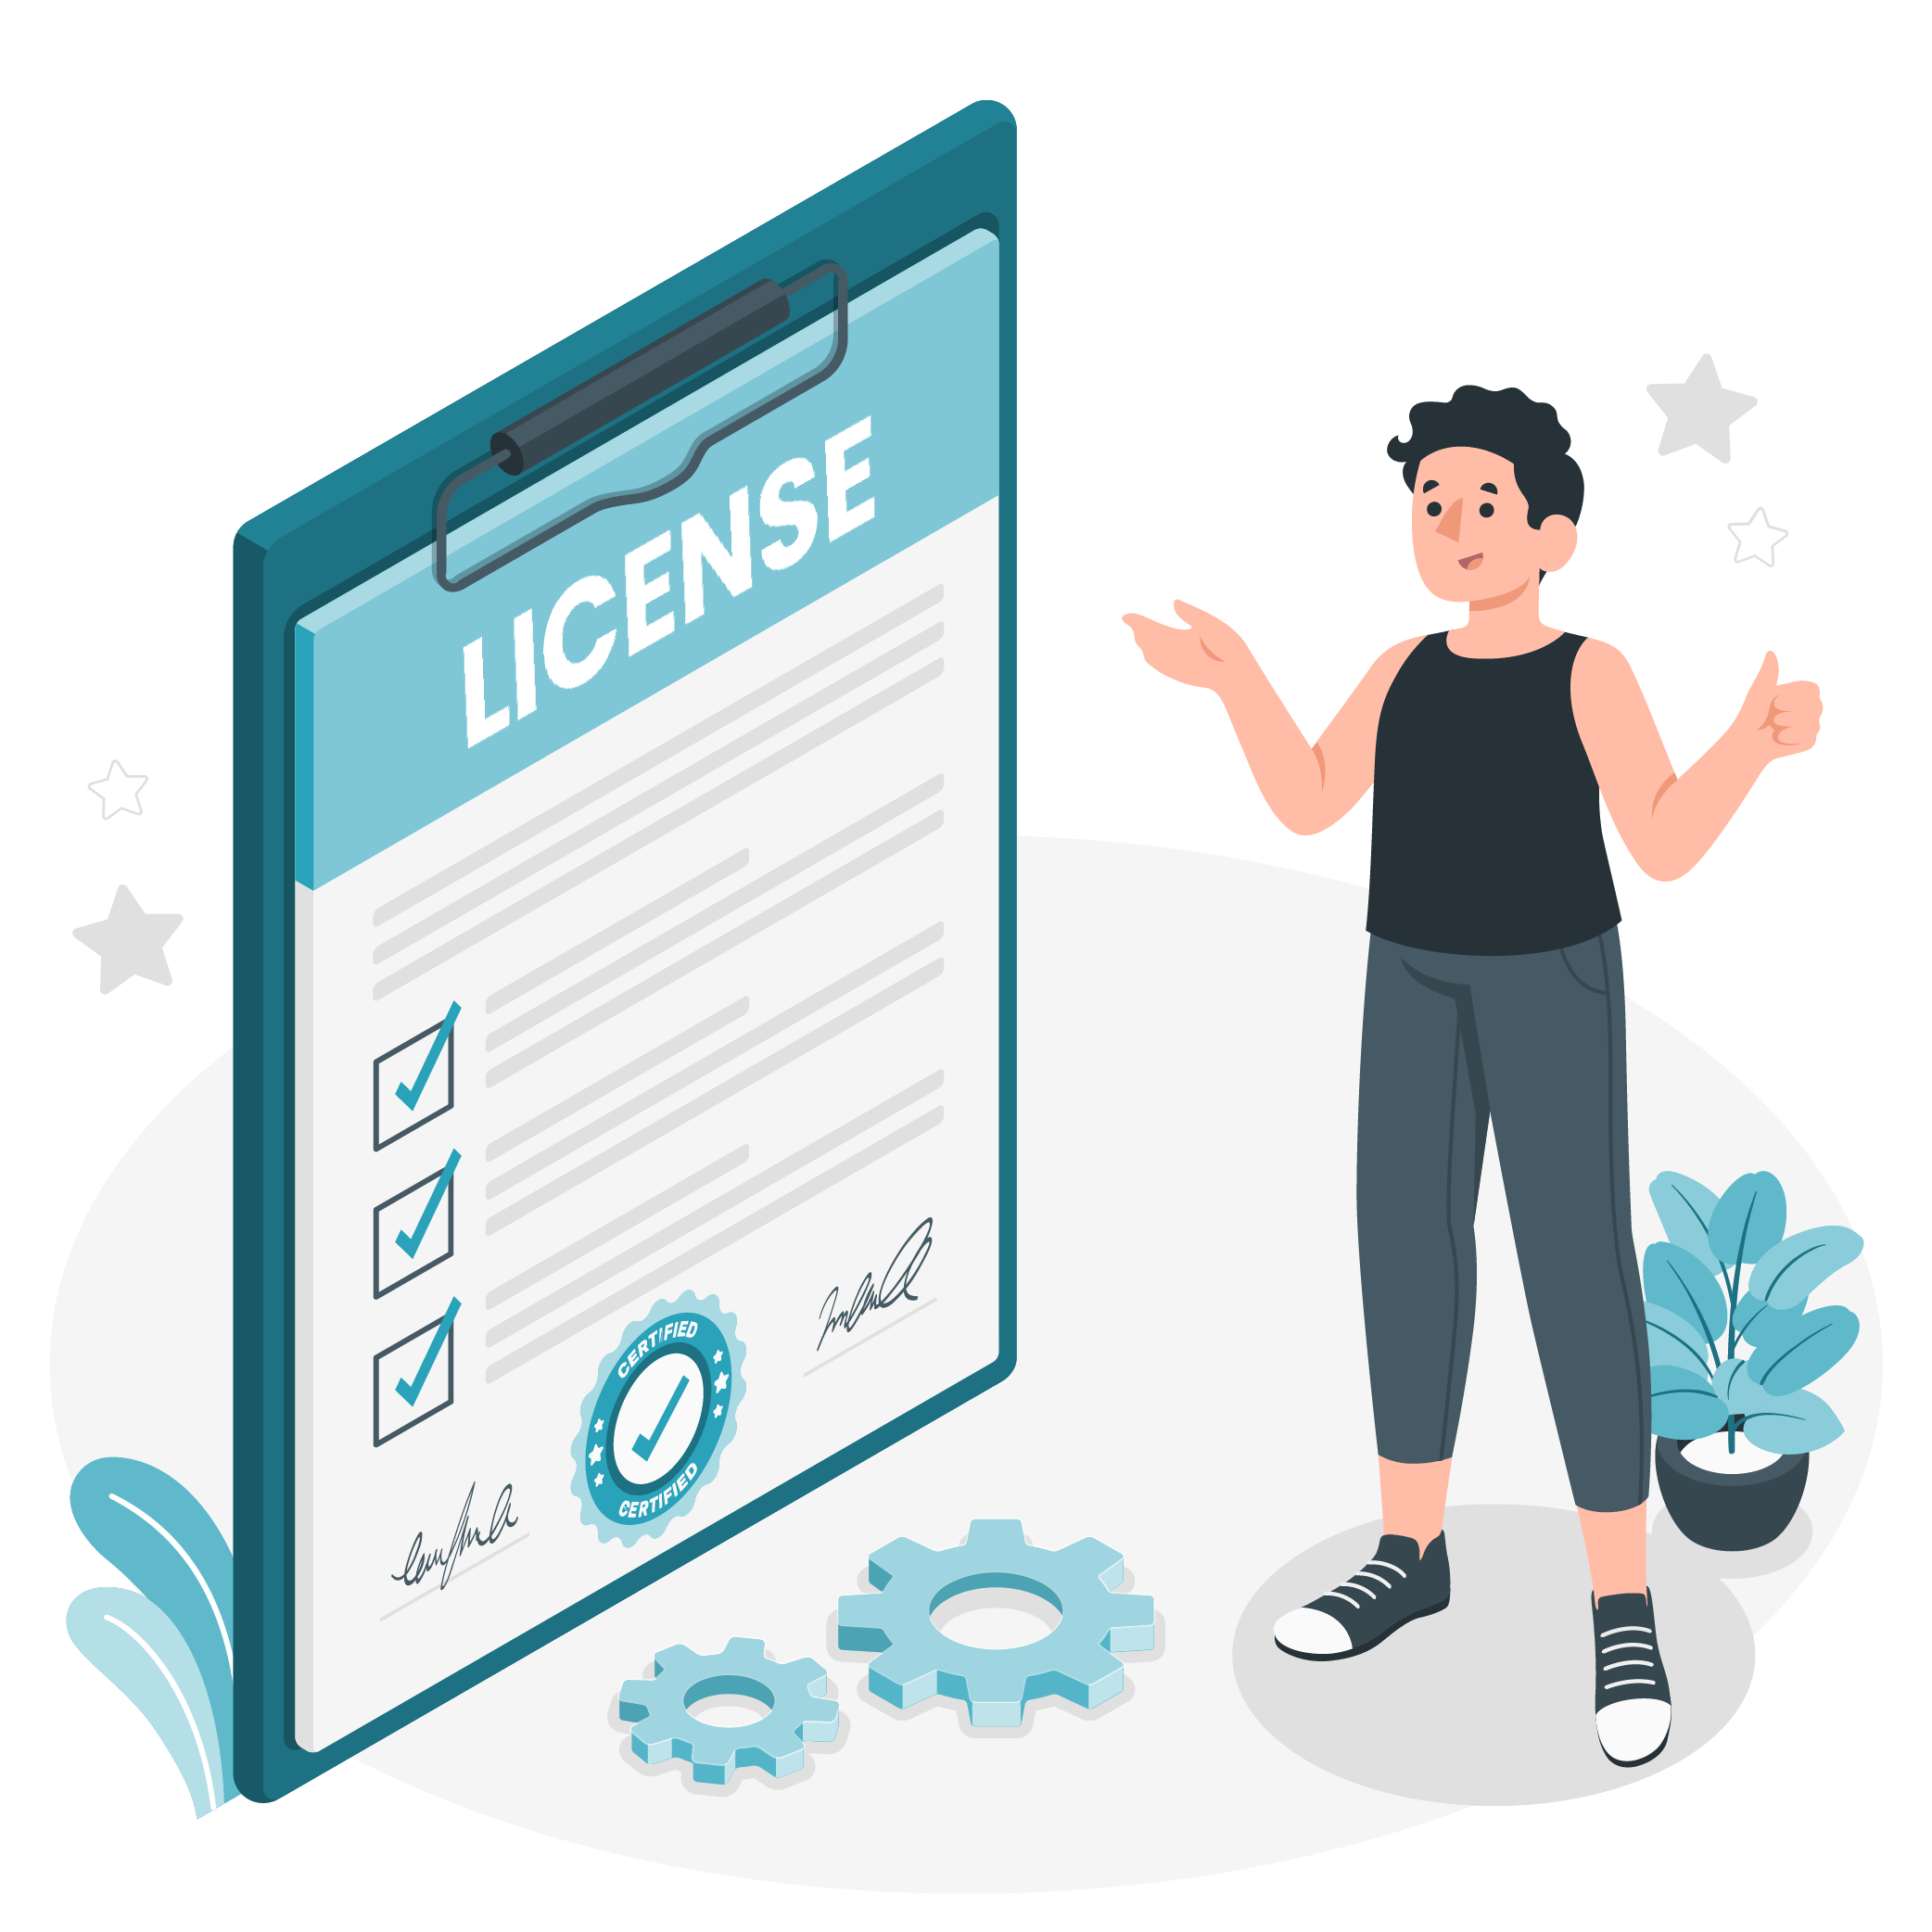 Business License cover